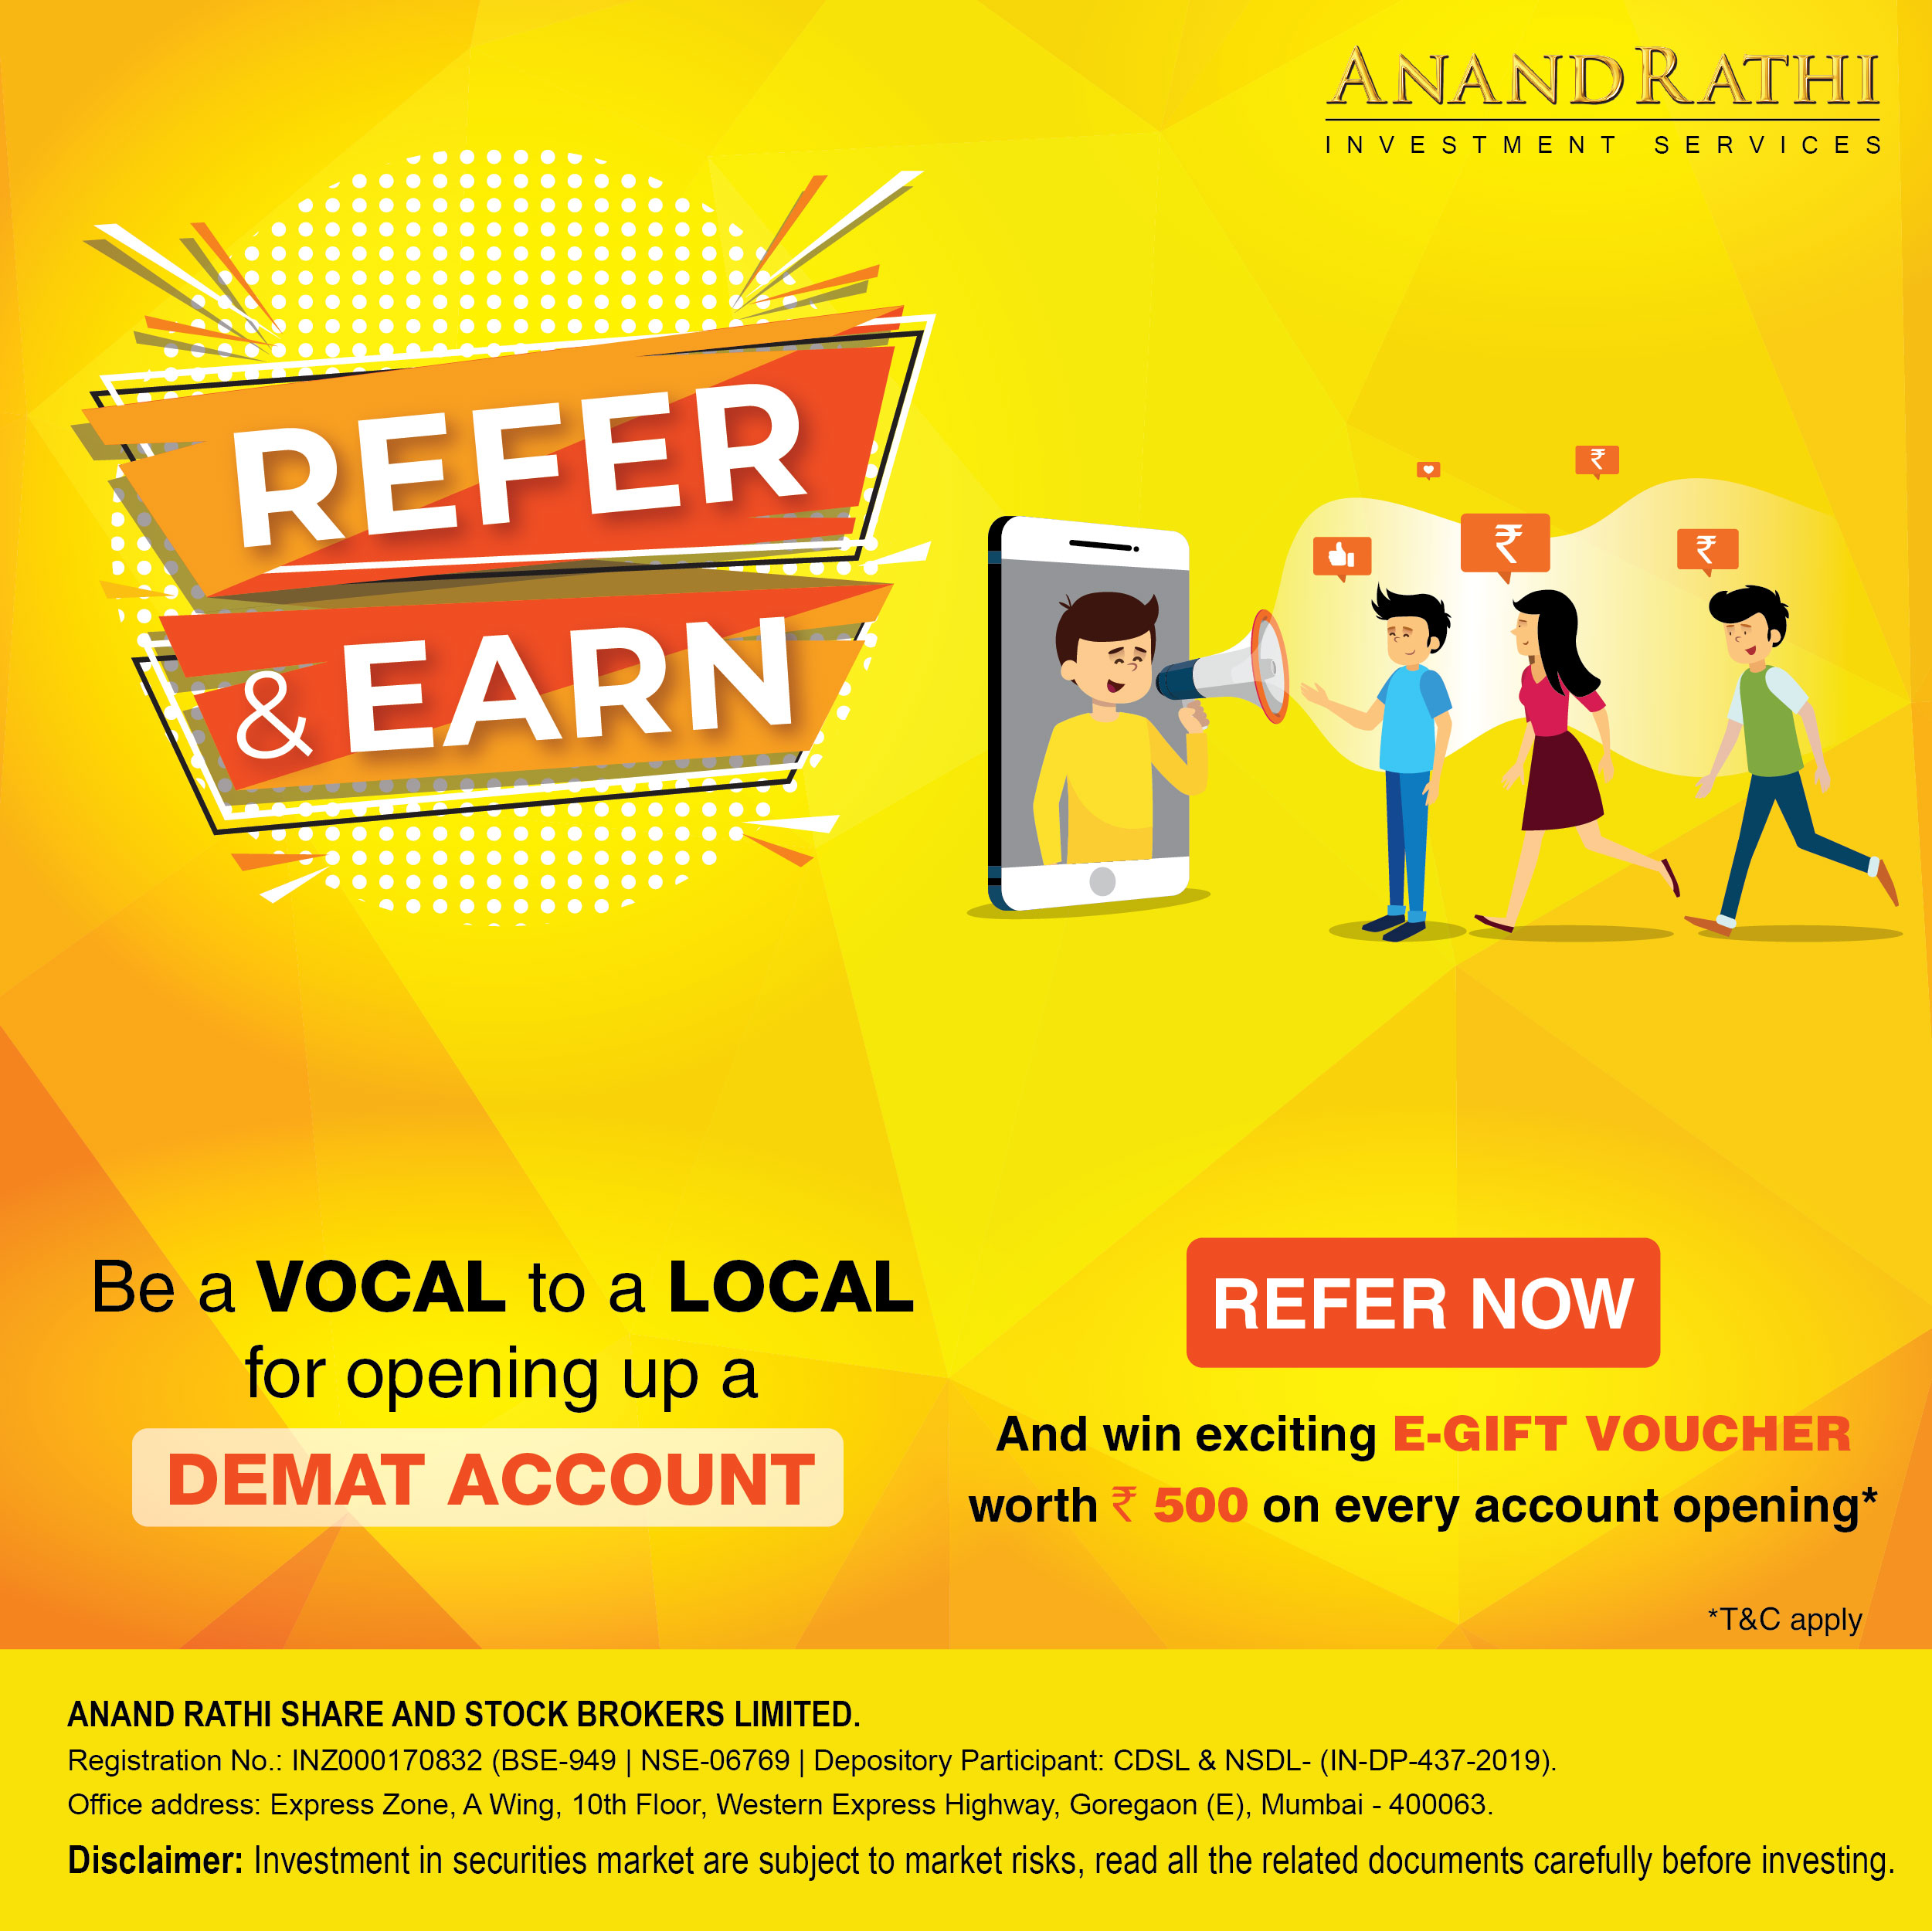 Anand Rathi Investment Services - Refer and Earn a E-Gift Voucher